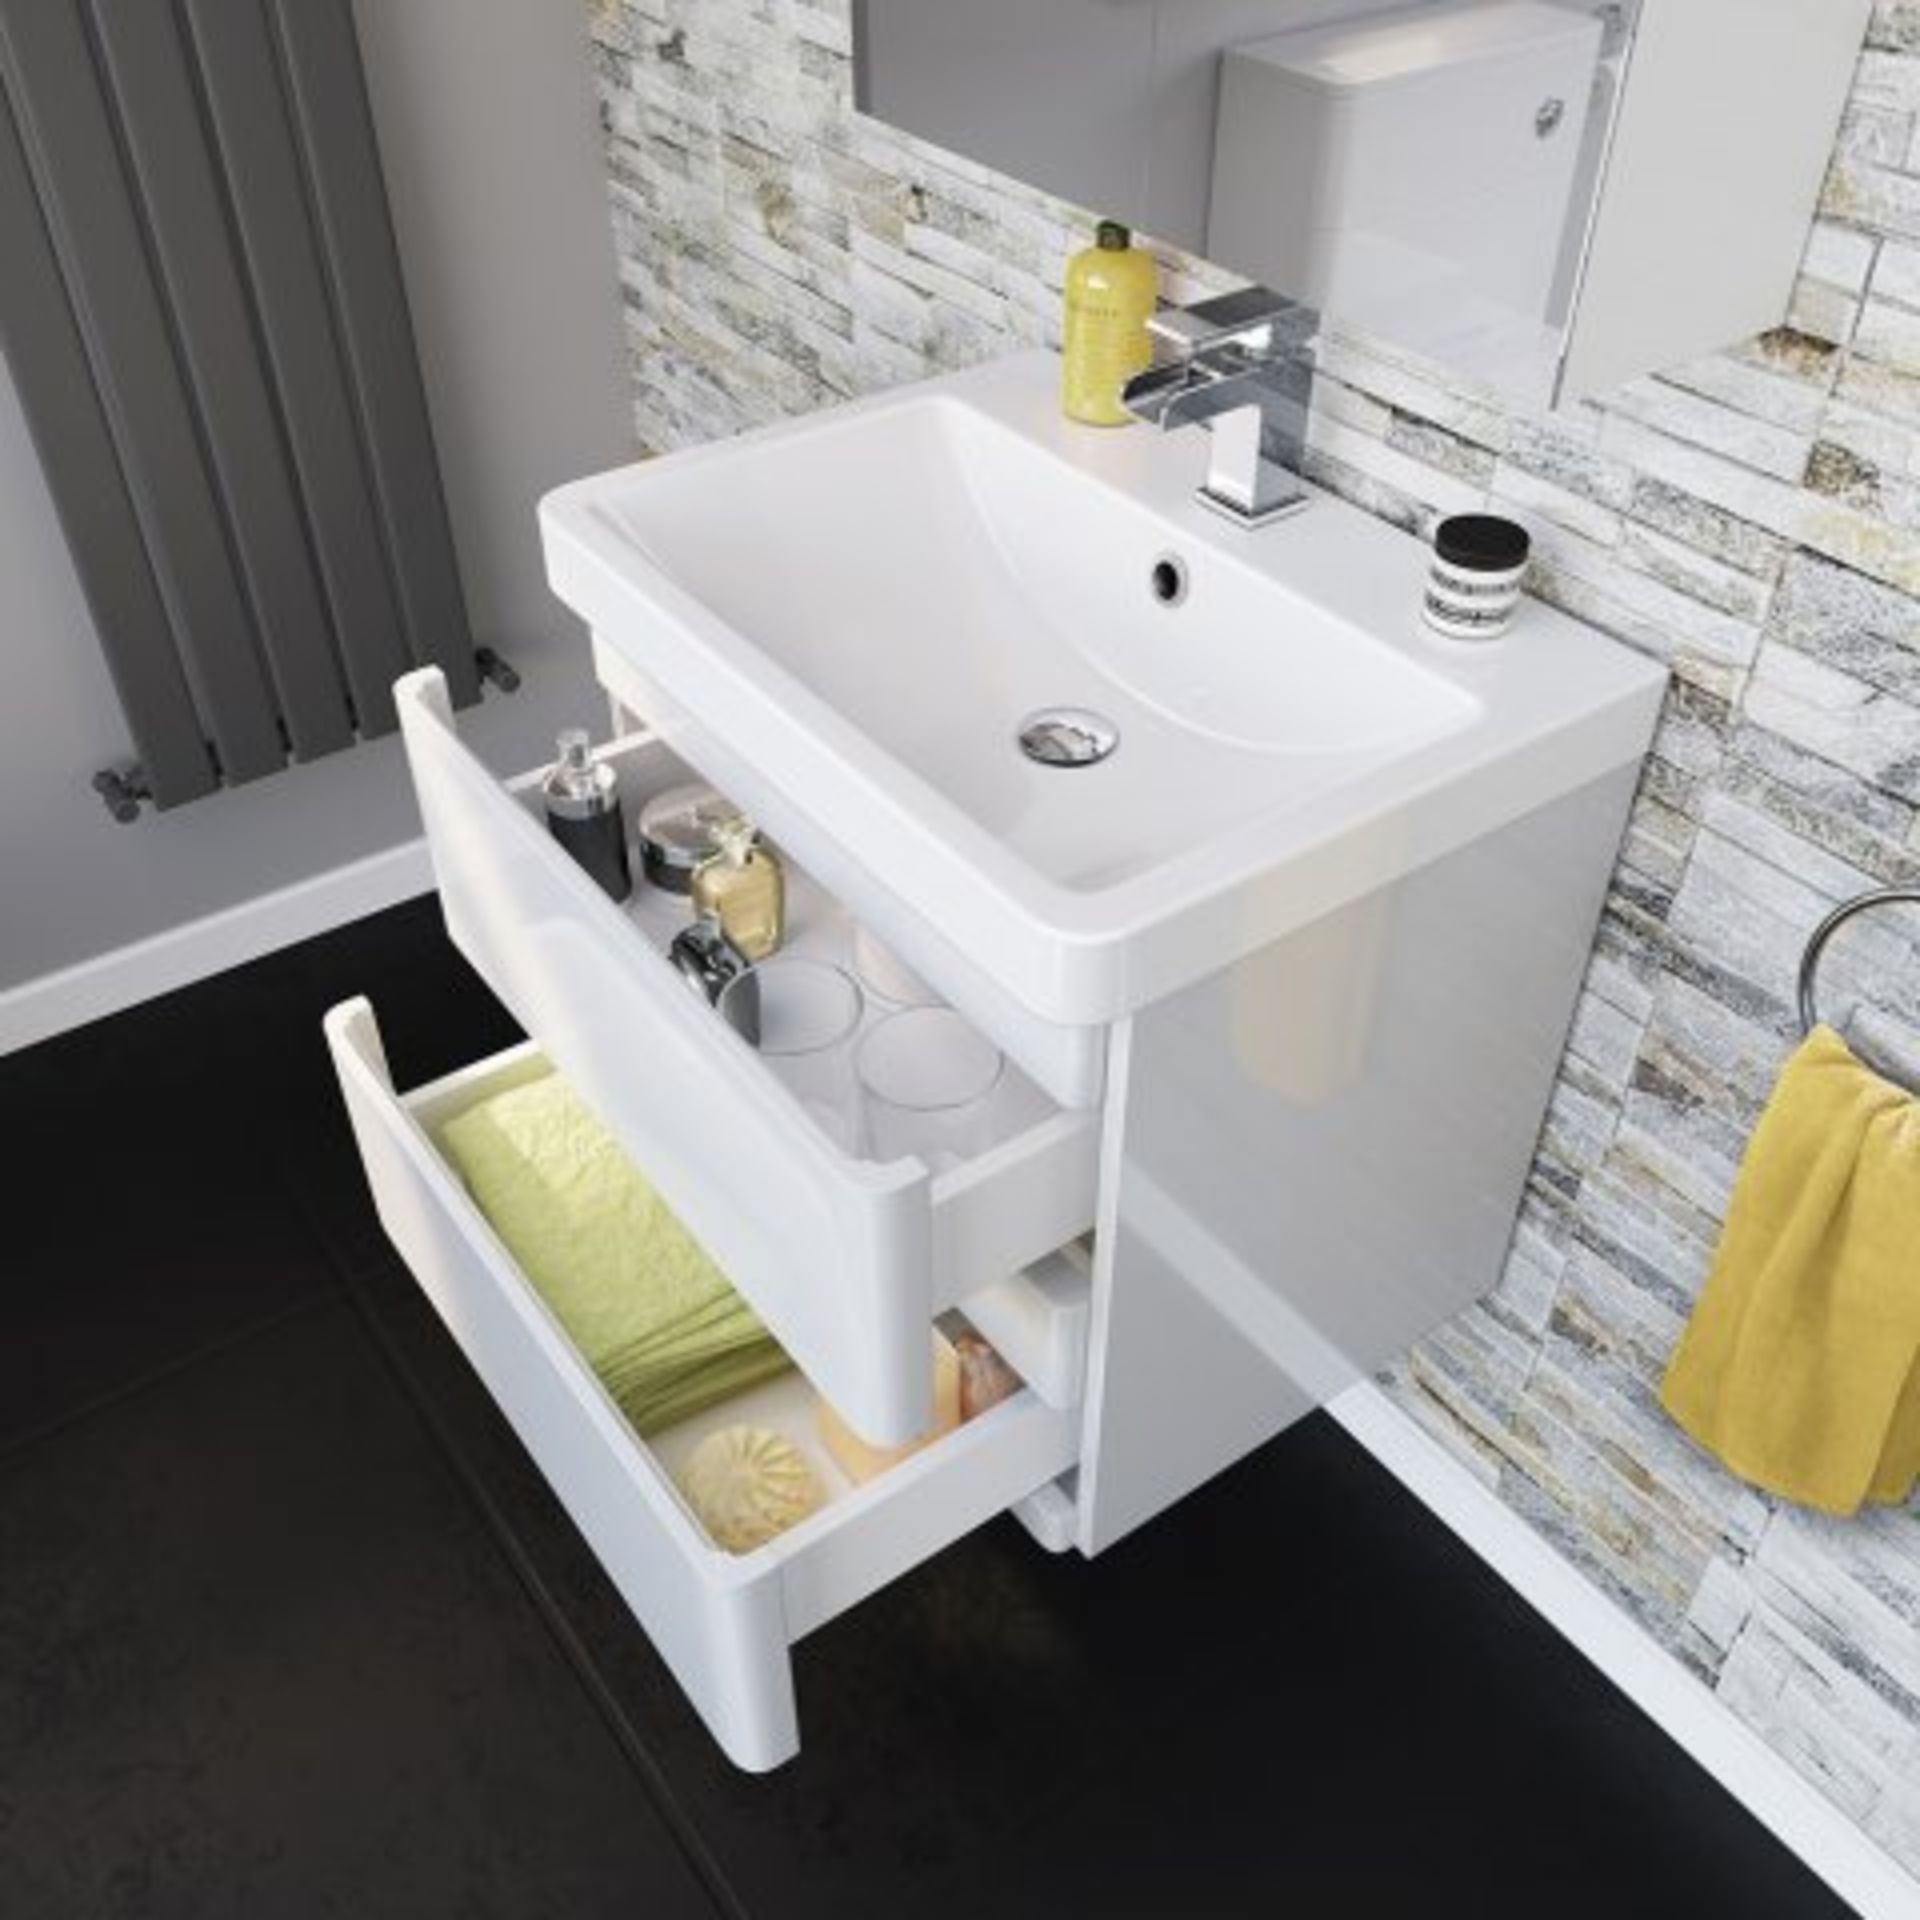 NEW & BOXED 600mm Denver II Gloss White Built In Basin Drawer Unit - Wall Hung. RRP £849.99.MF... - Image 3 of 3